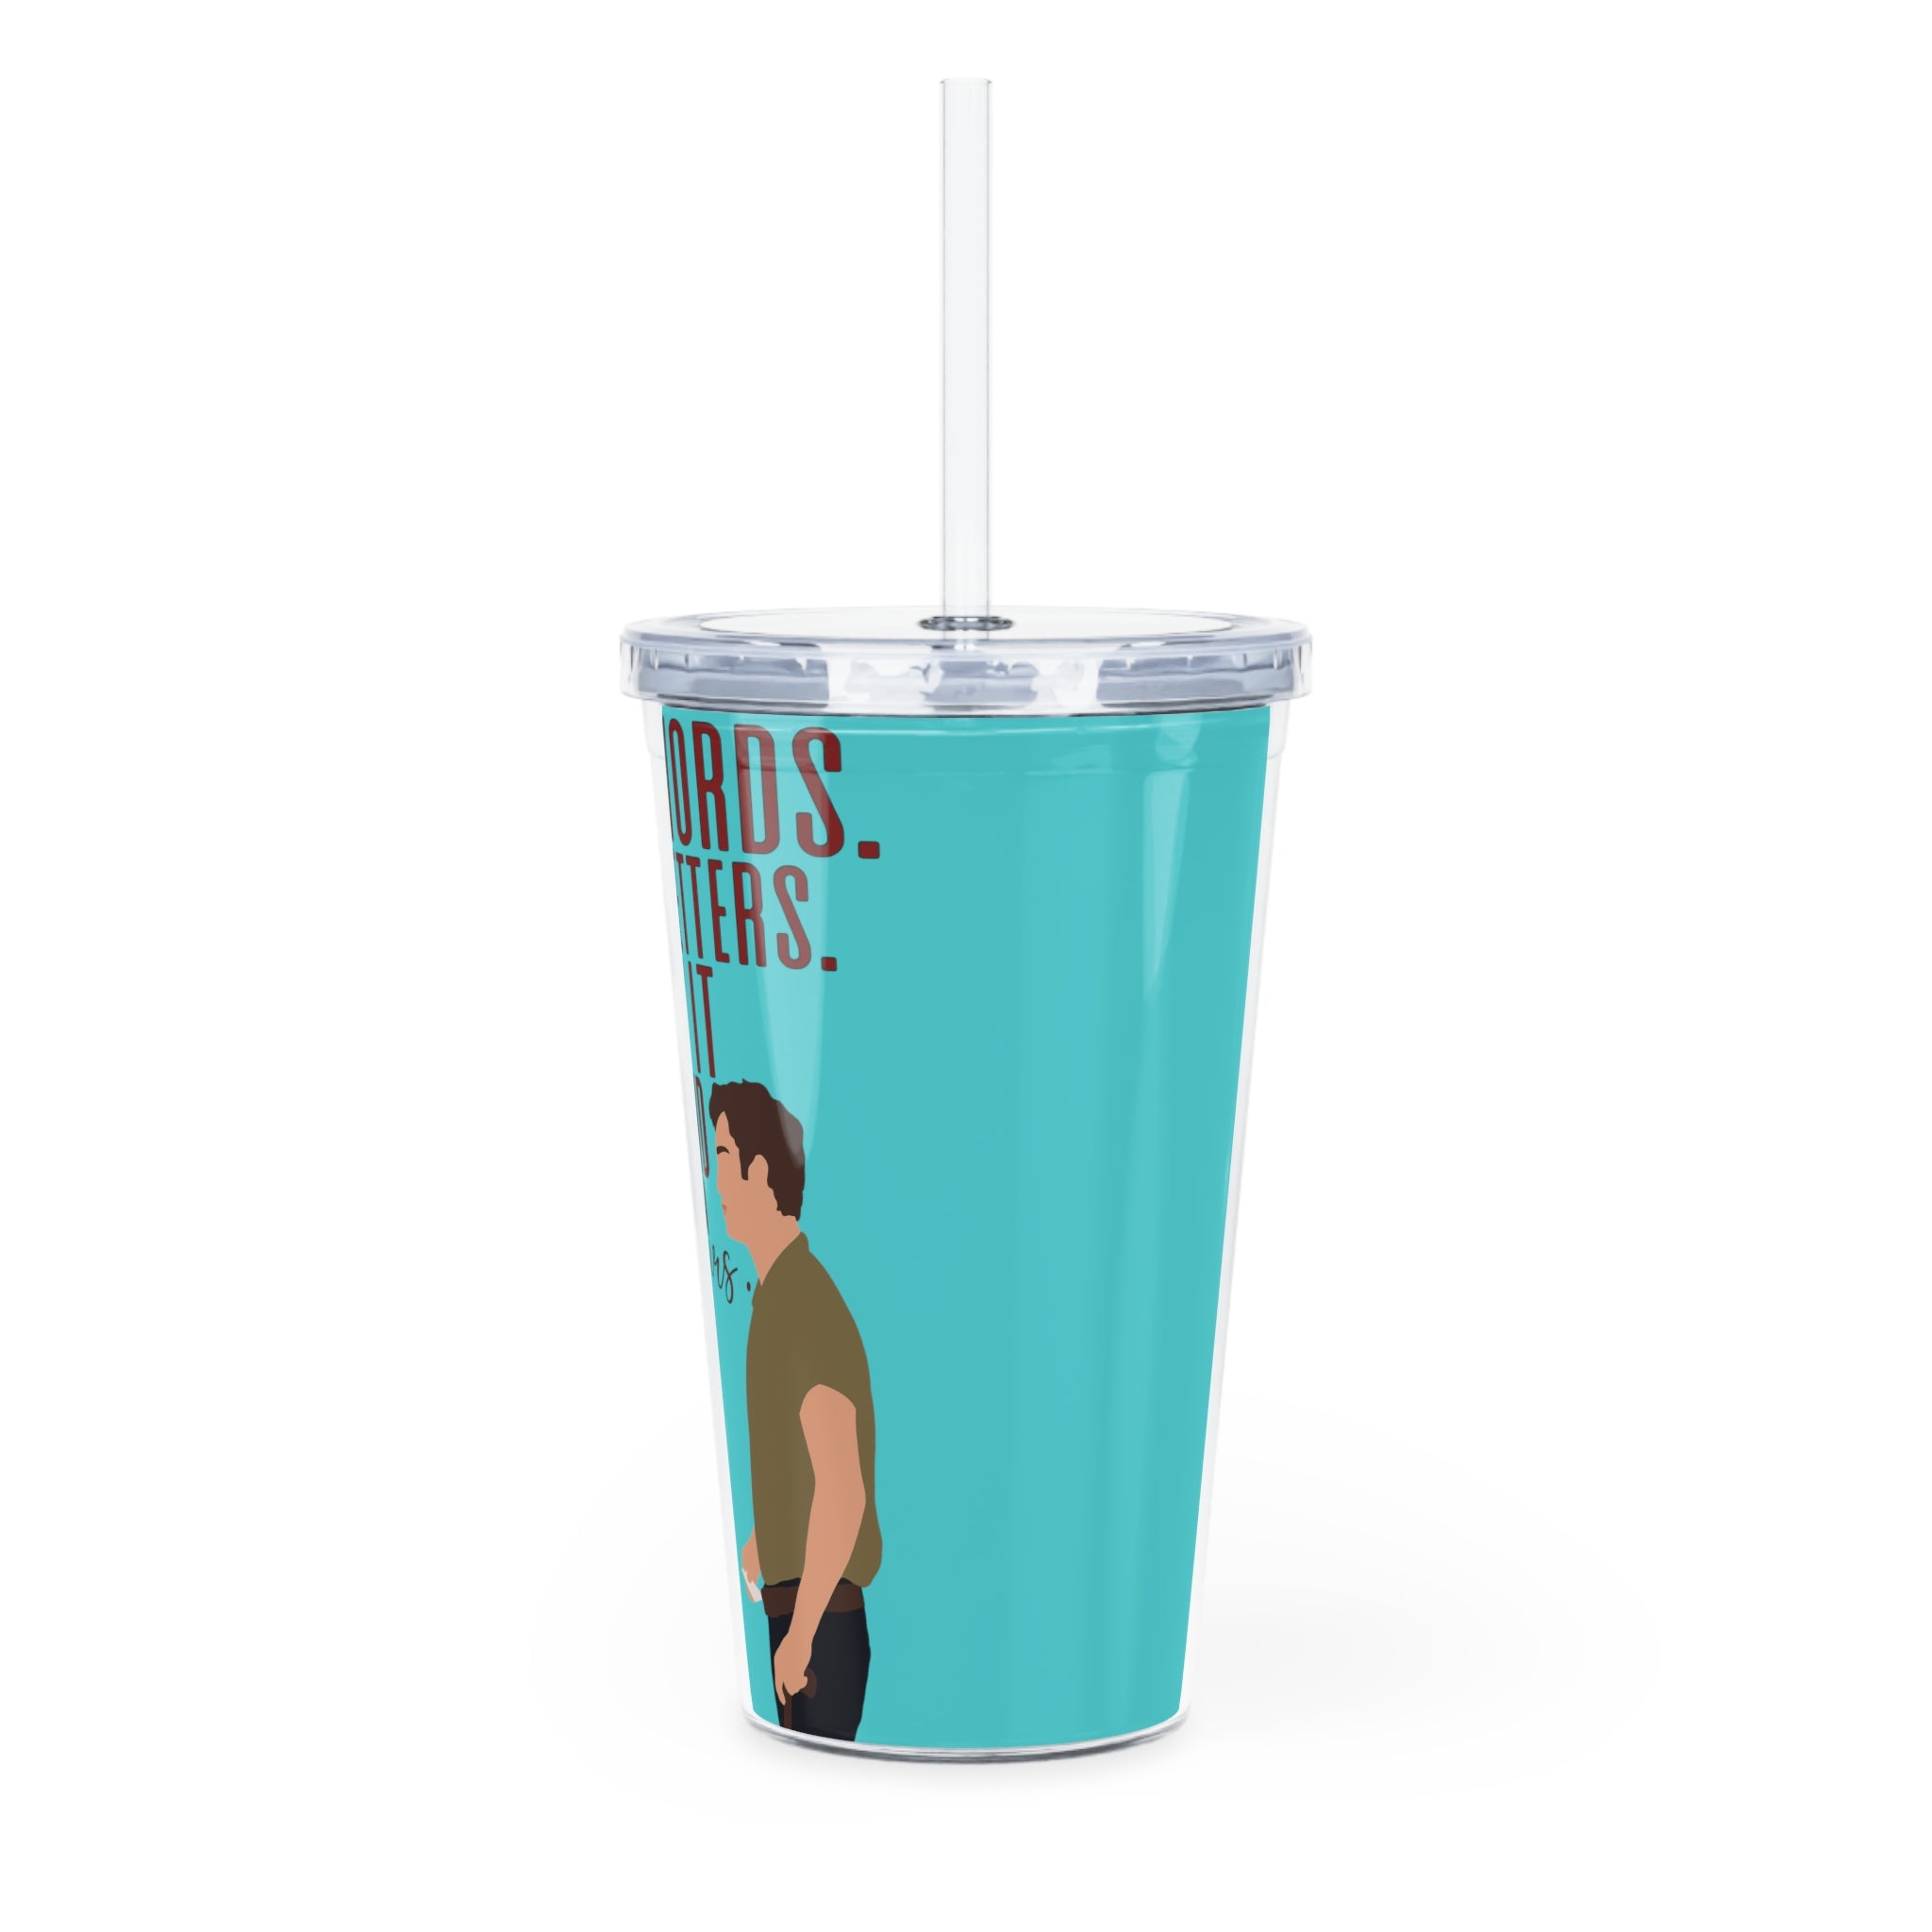 Three Words Eight Letters Chuck & Blair Plastic Tumbler with Straw